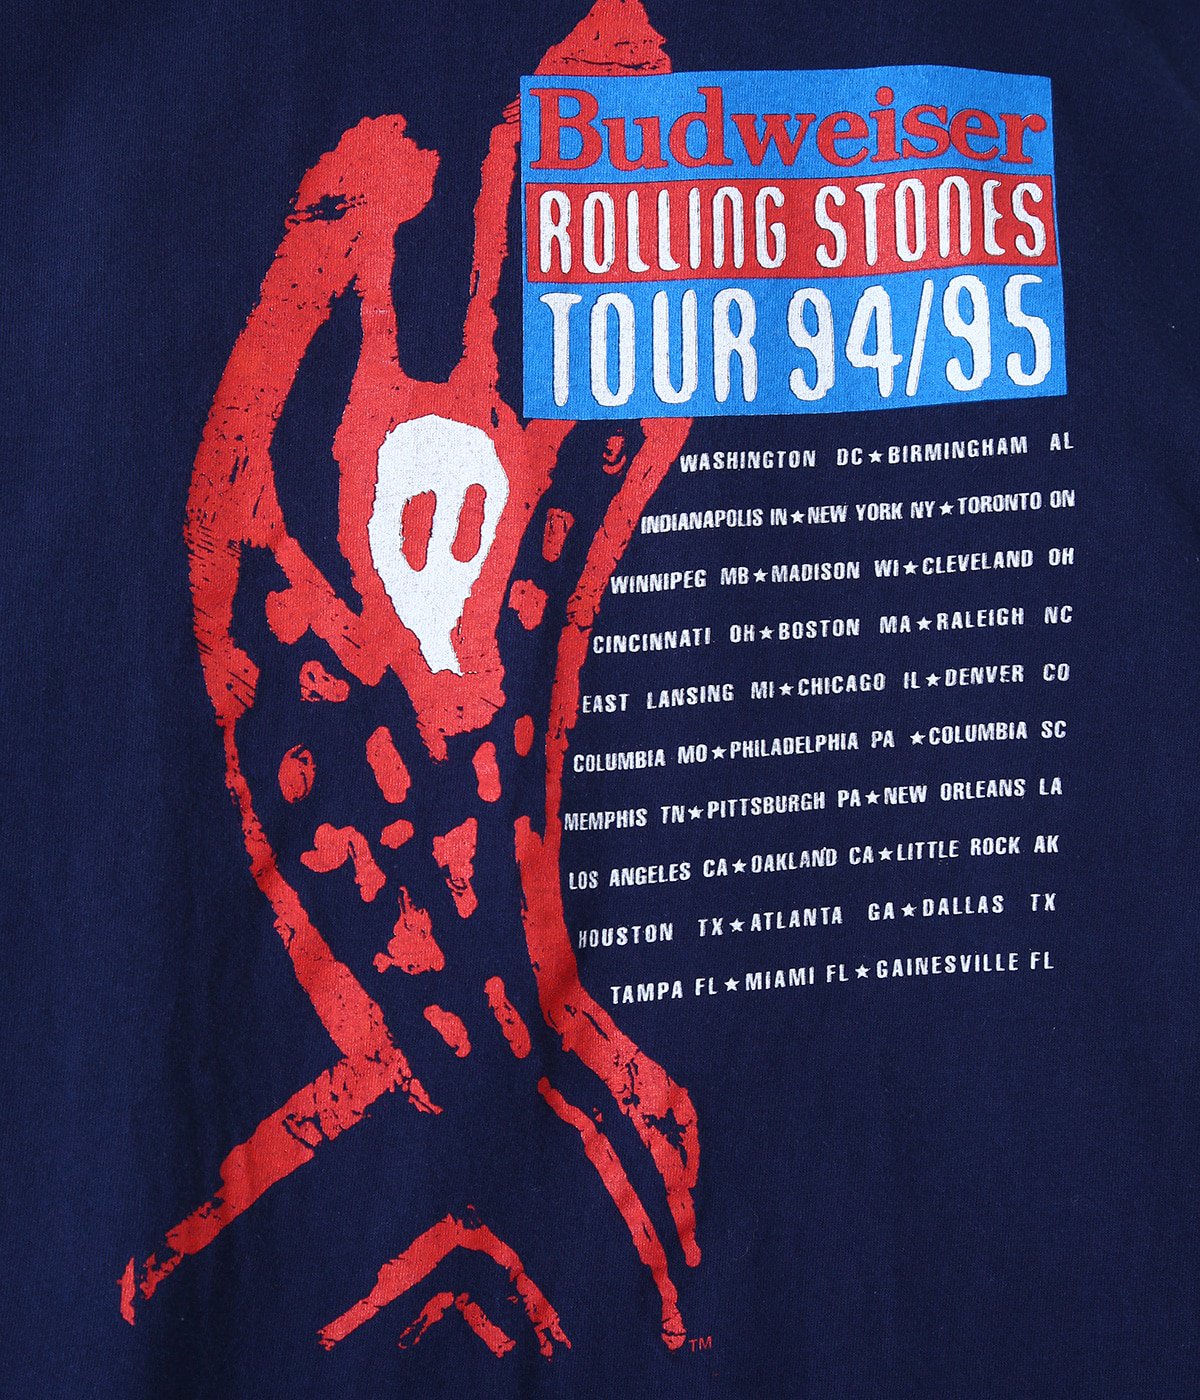 【USED】ROLLING STONES T-Shirts